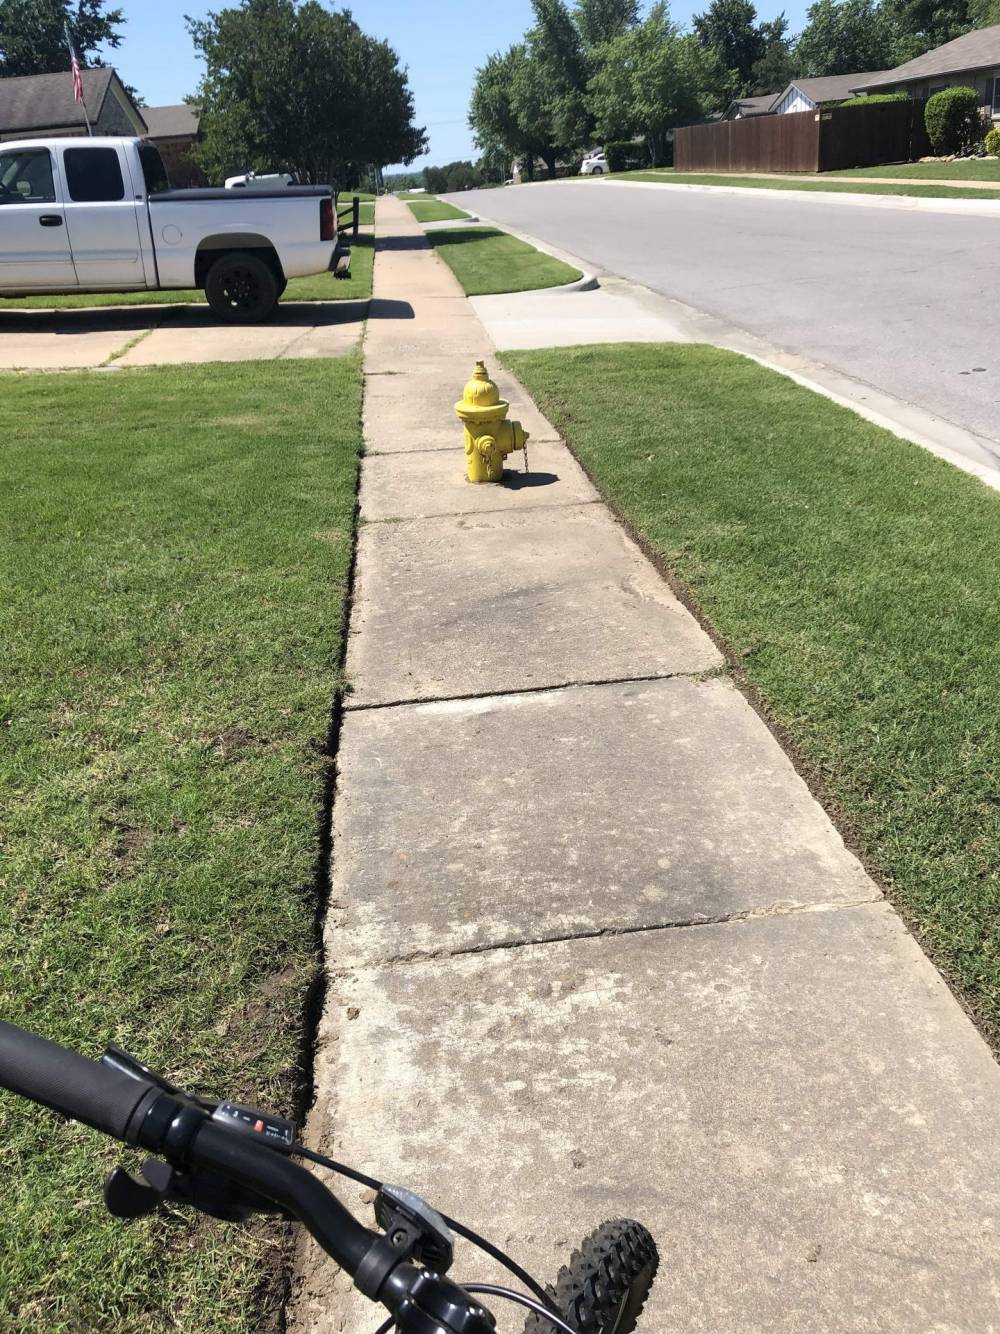 tiny yellow fire hydrant in the middle of the sidewalk